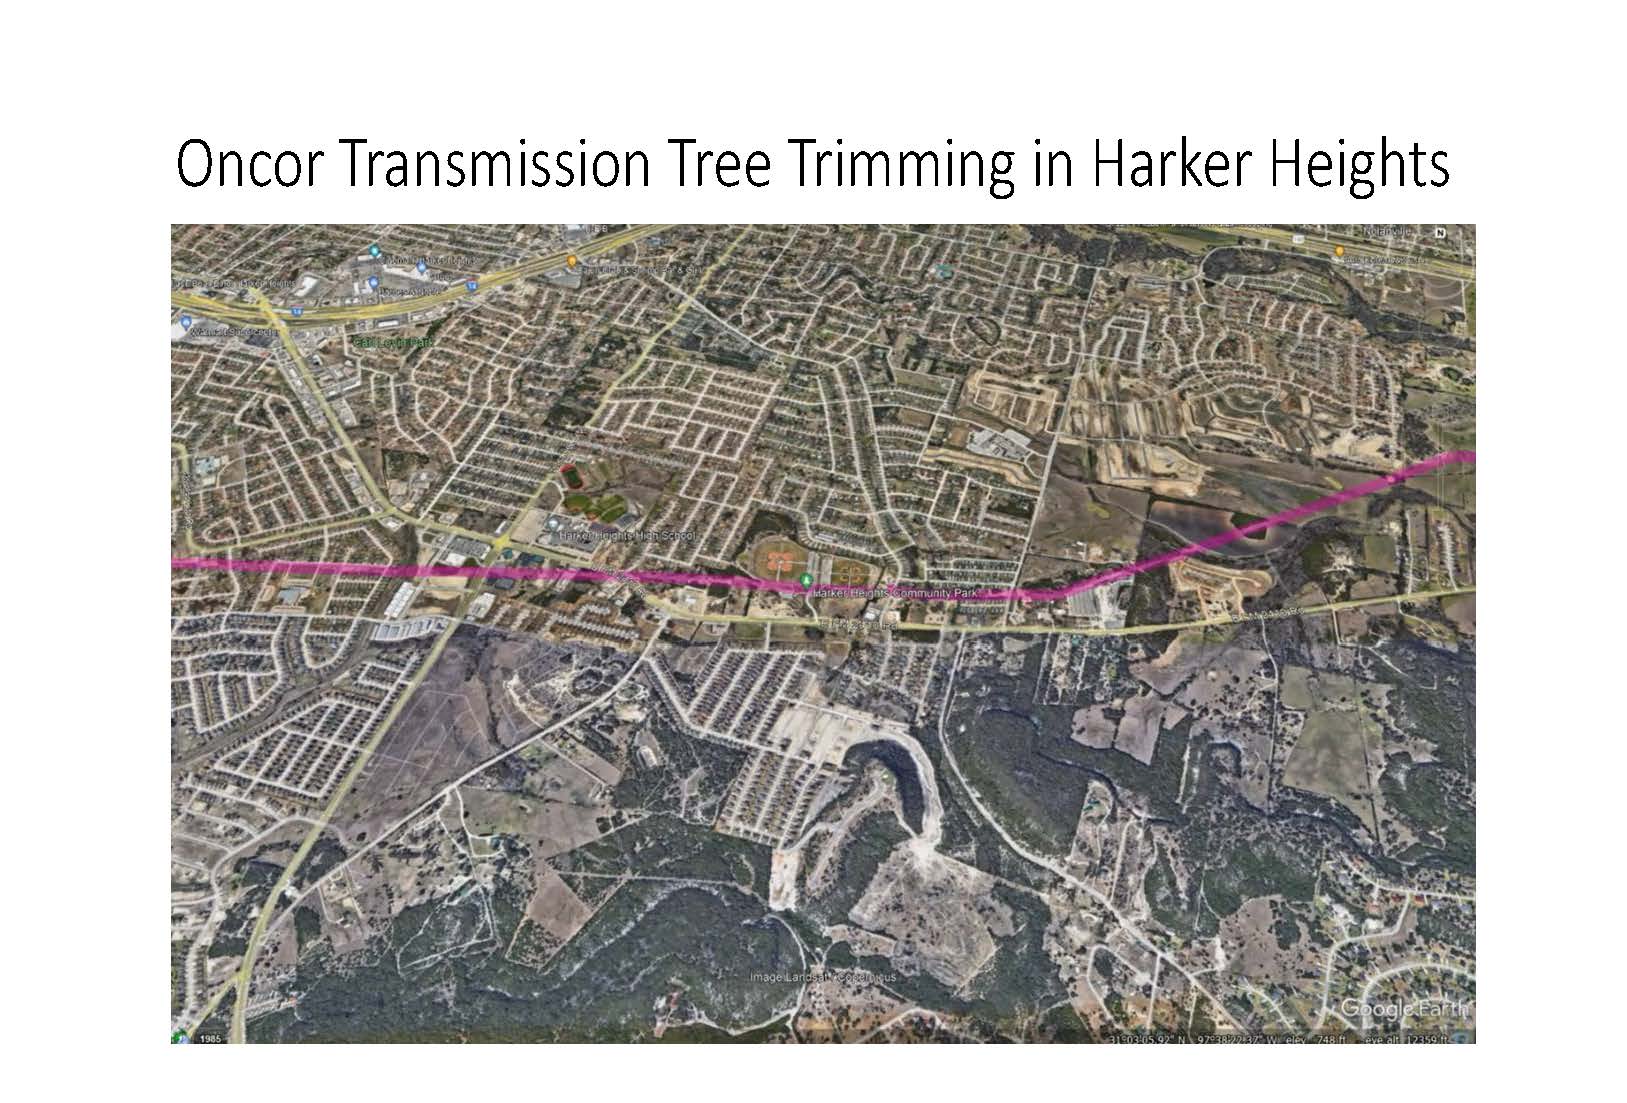 Oncor Transmission Tree Trimming in Harker Heights